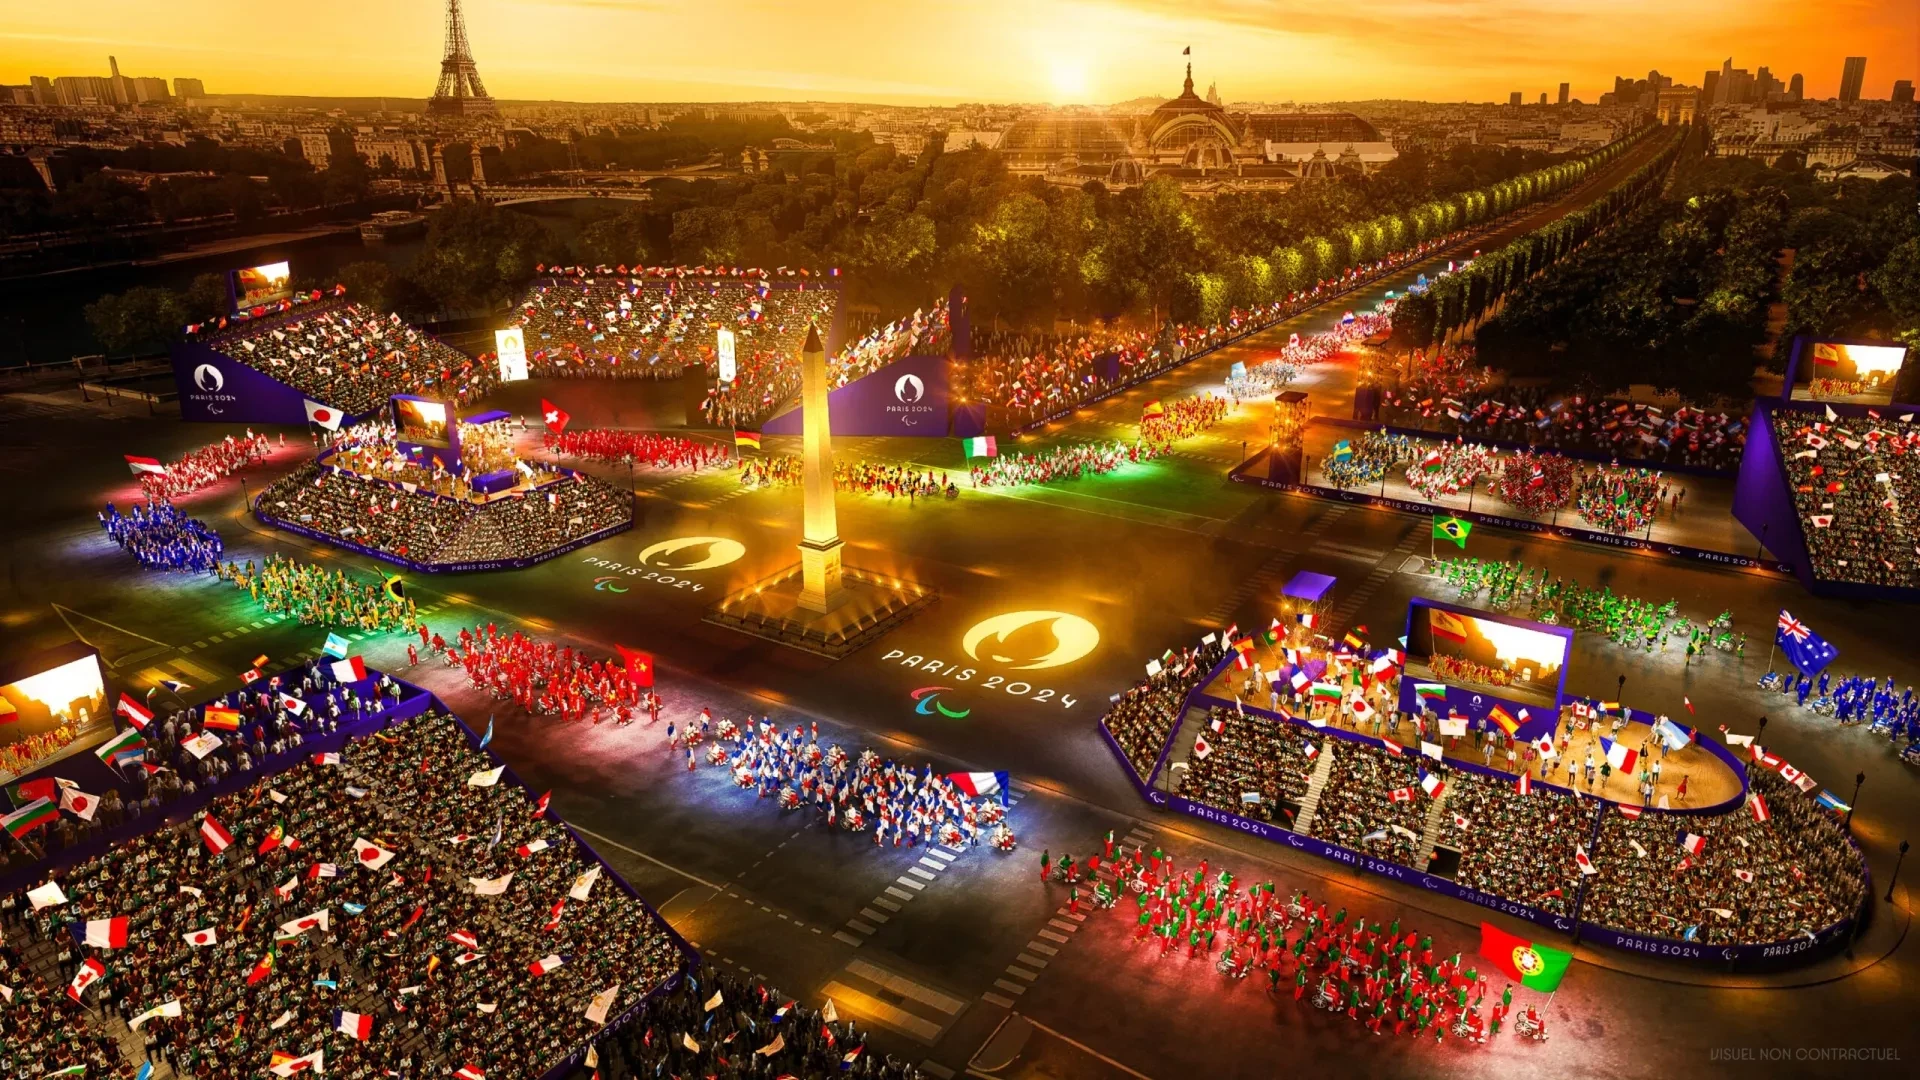 The Paris 2024 Paralympic Games Opening Ceremony is set to centre around the Place de la Concorde with the Parade of Nations going down the Champs-Élysées ©Paris 2024